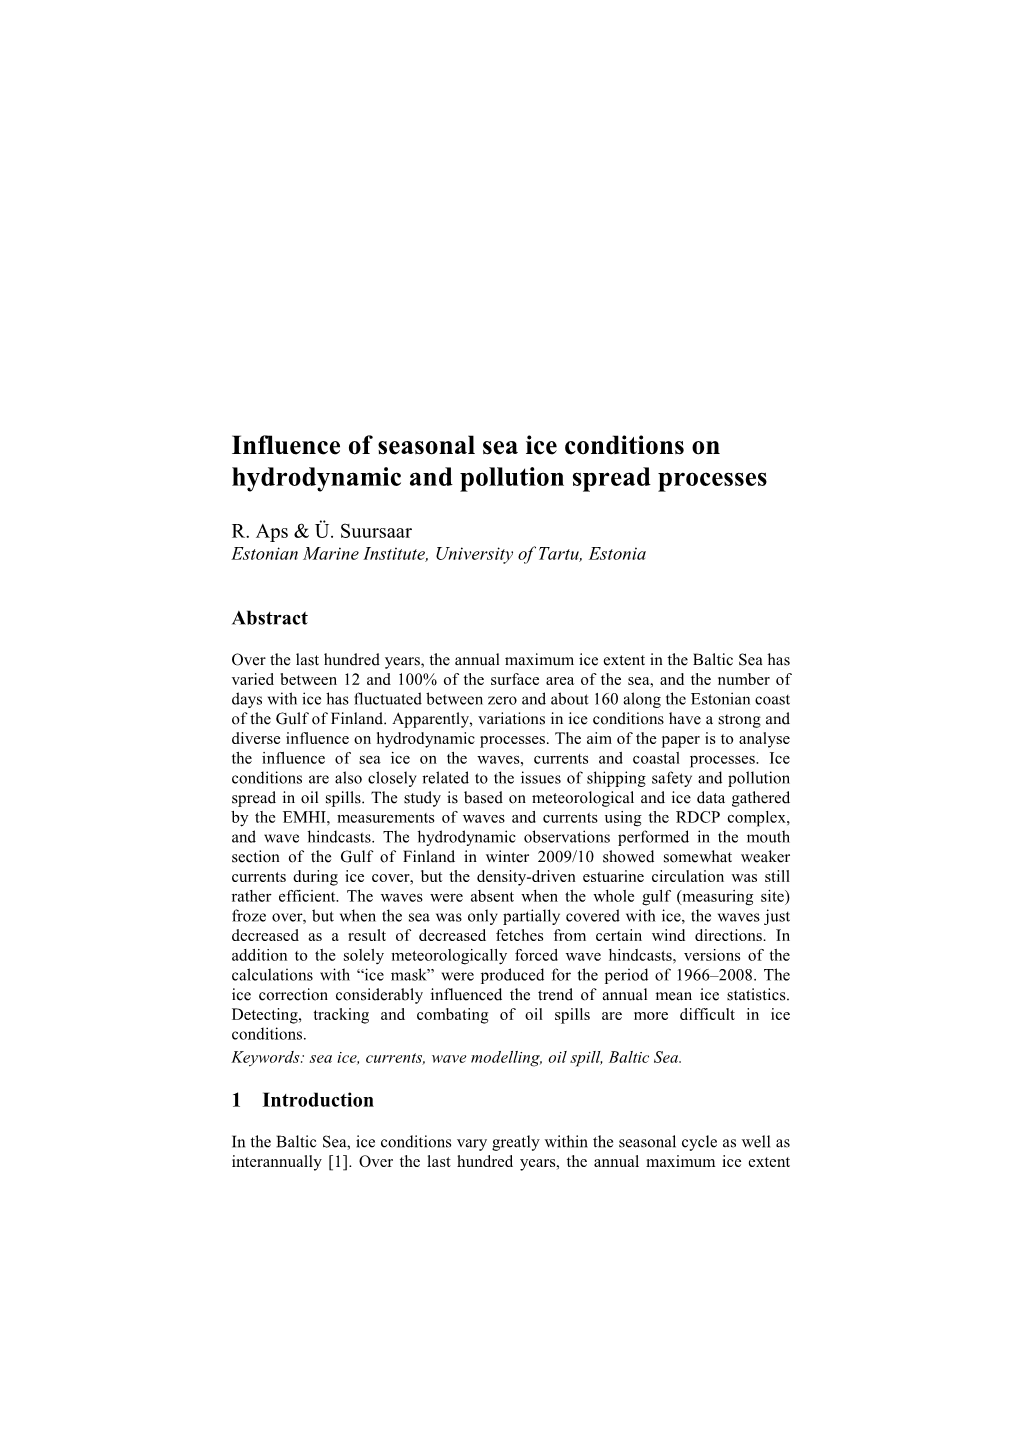 Influence of Seasonal Sea Ice Conditions on Hydrodynamic and Pollution Spread Processes